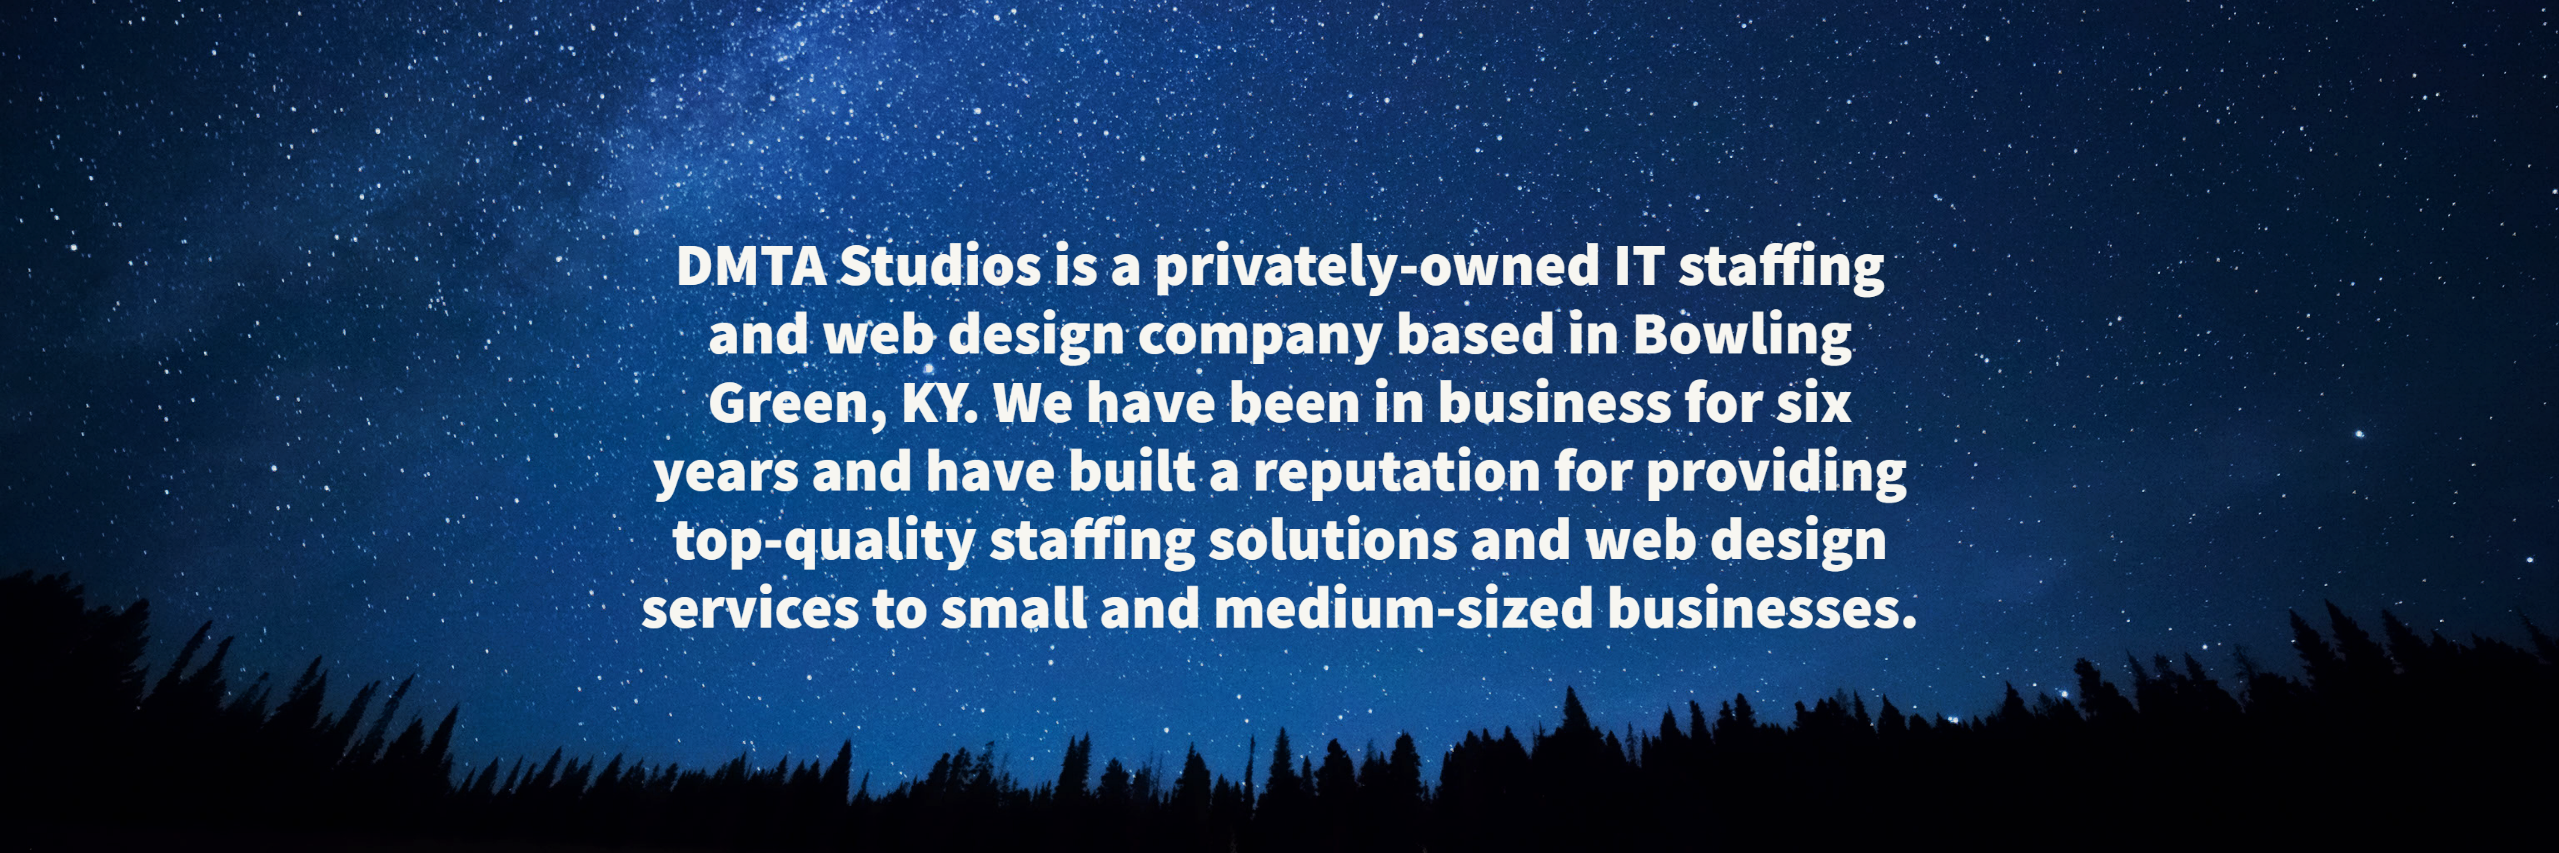 DMTA Studios is a privately-owned IT staffing and web design company based in Bowling Green, KY. We have been in business for six years and have built a reputation for providing top-quality staffing solutions and web design services to small and medium-sized businesses.